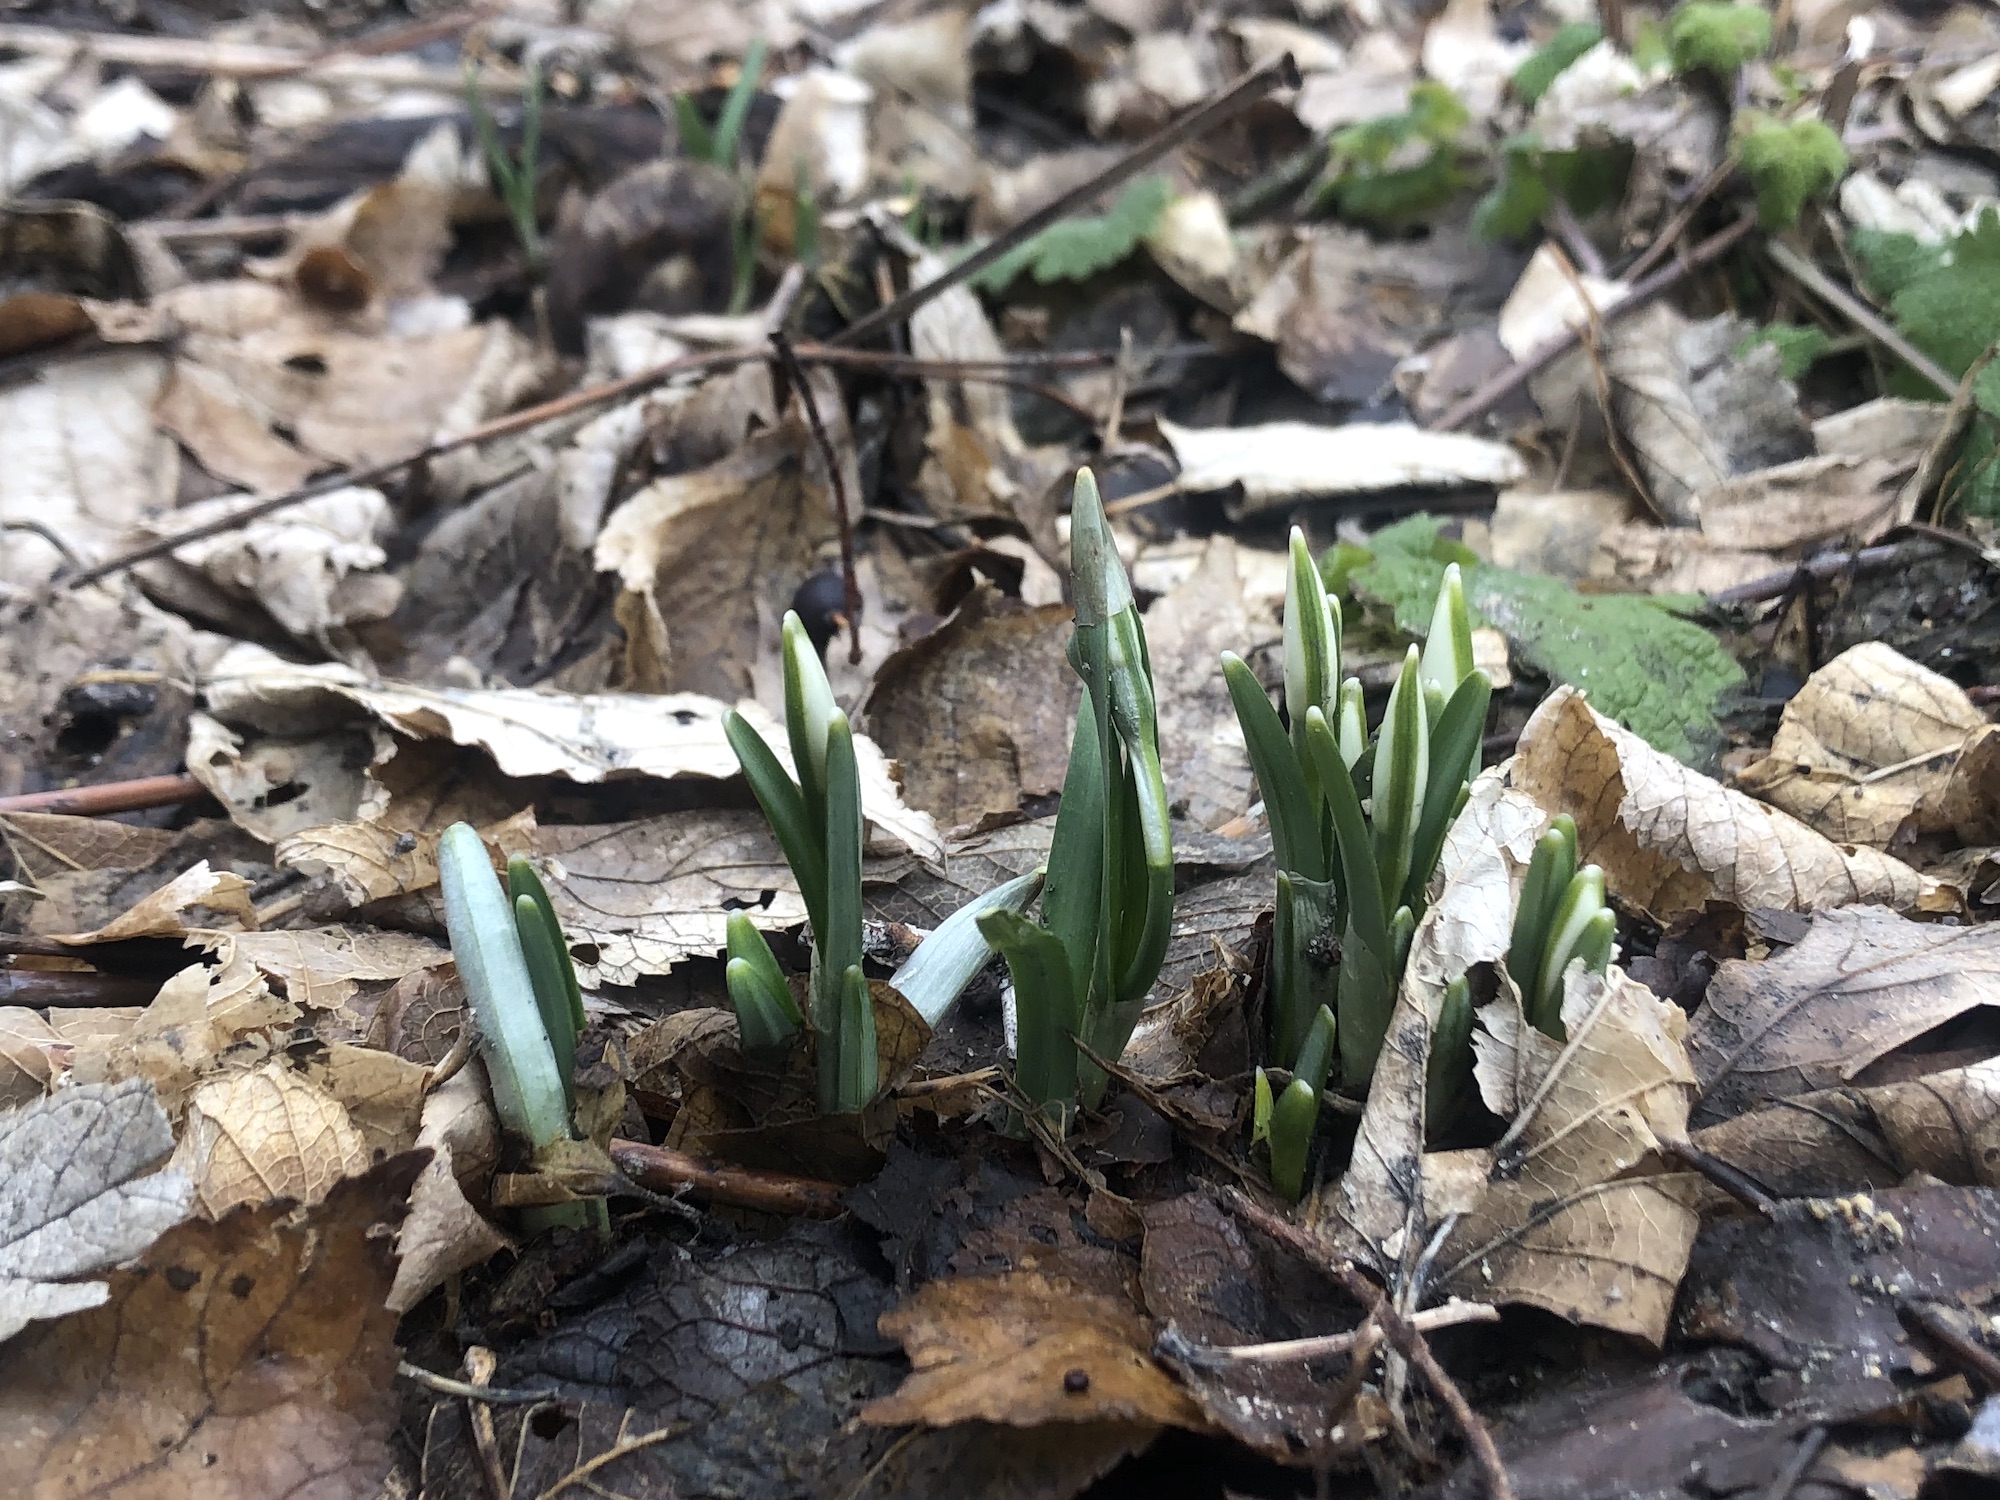 nowdrops emerging in woods off of Arbor Drive on February 15, 2023.